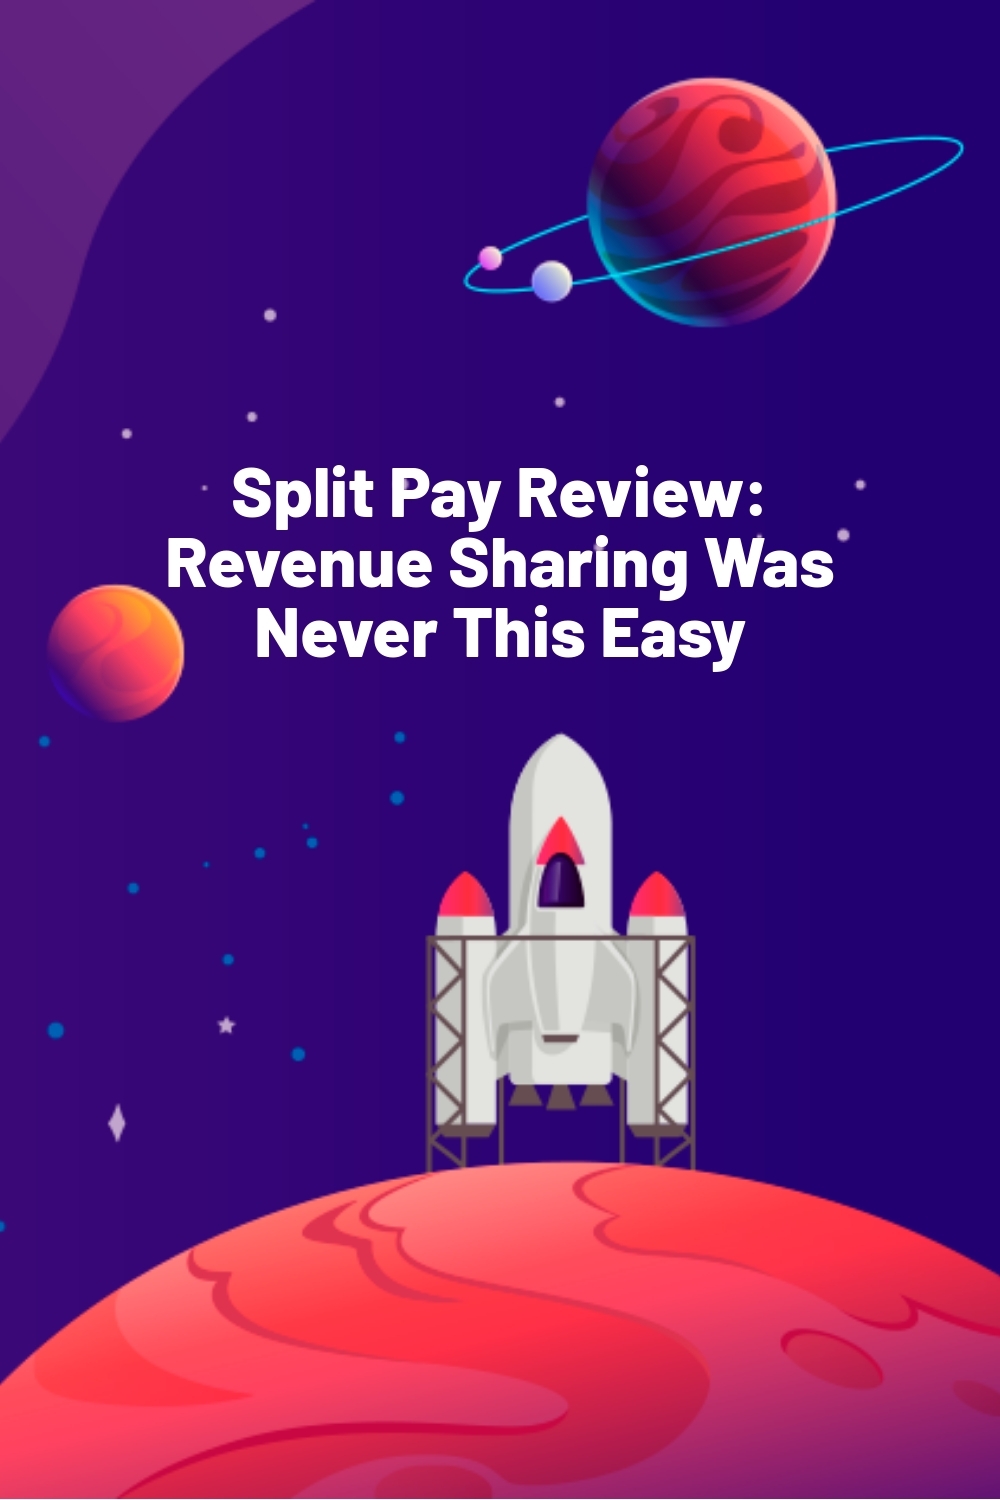 Split Pay Review: Revenue Sharing Was Never This Easy